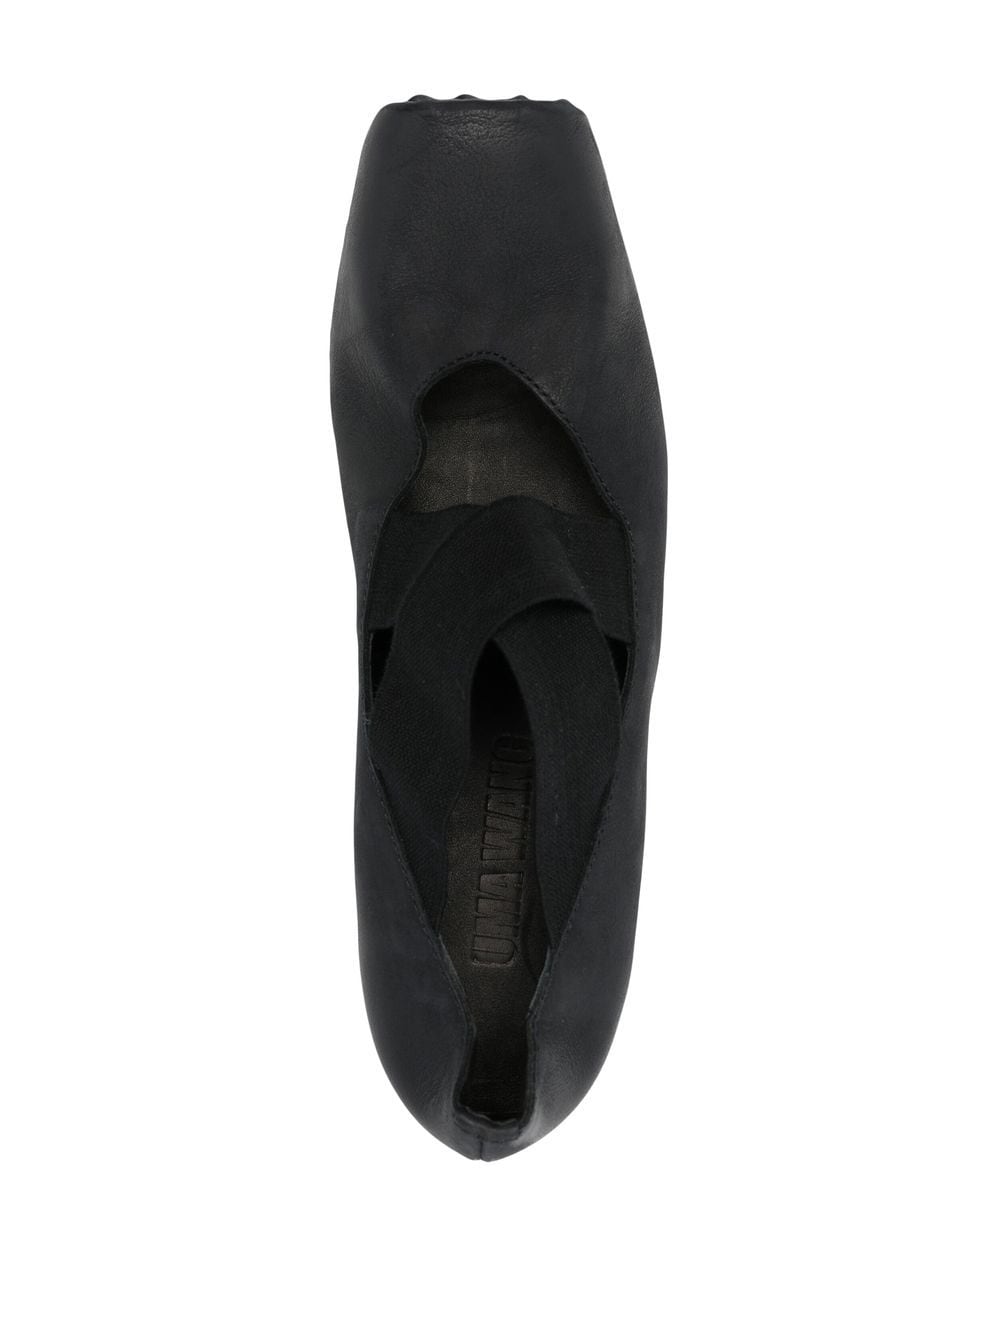 square-toe High Ballet shoes